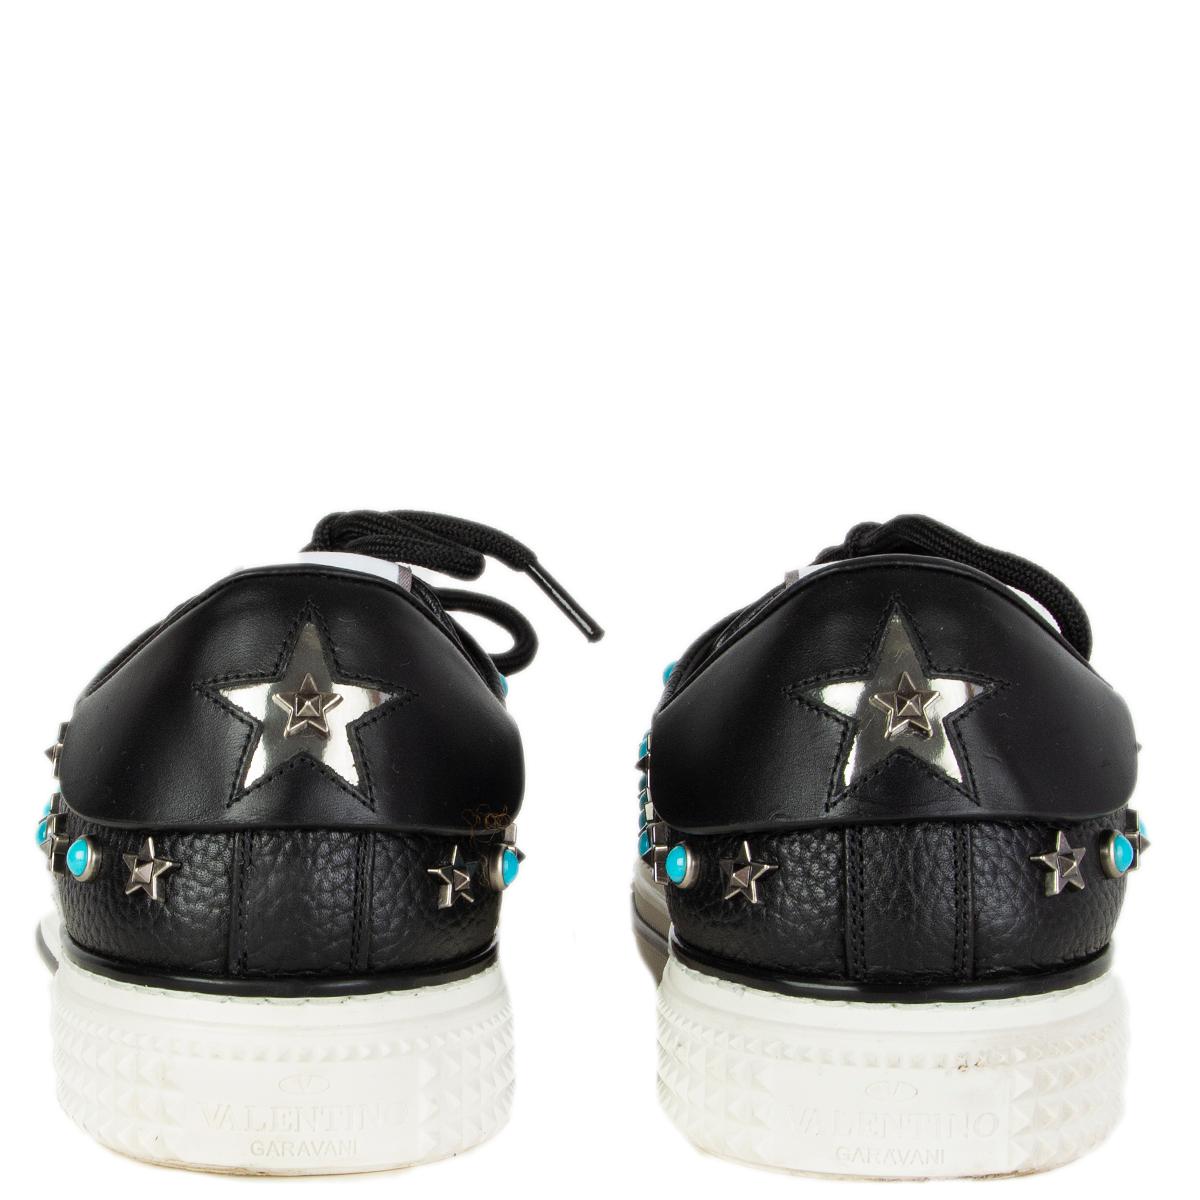 Women's VALENTINO black leather STAR STUDDED Sneakers Shoes 41